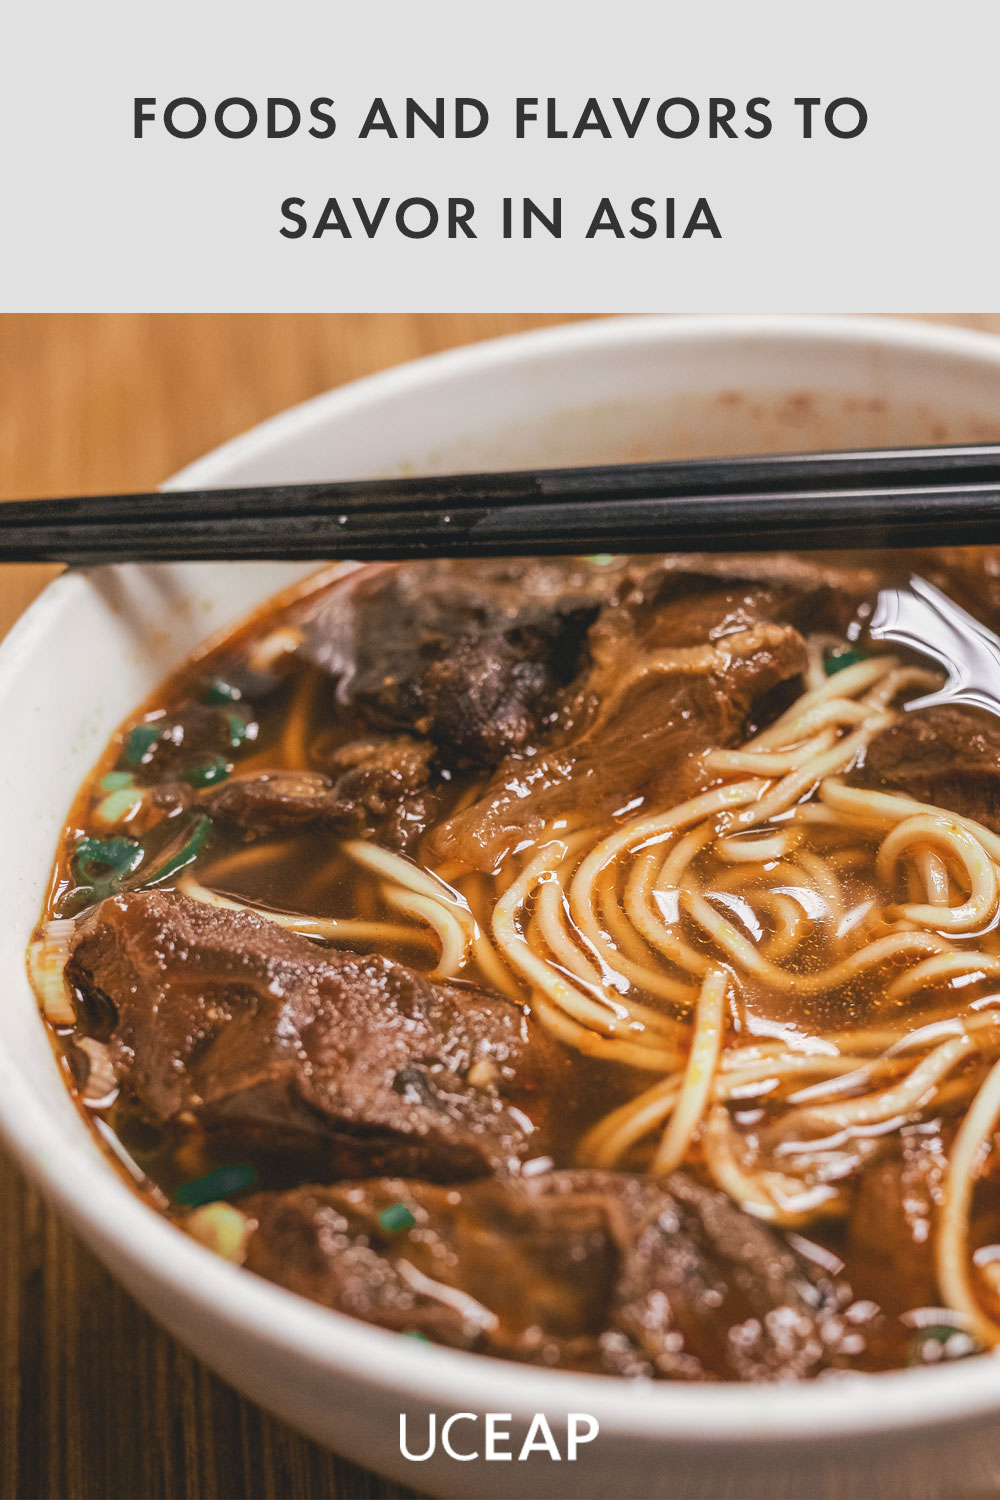 Beef and noodles with chopsticks in a white bowl.